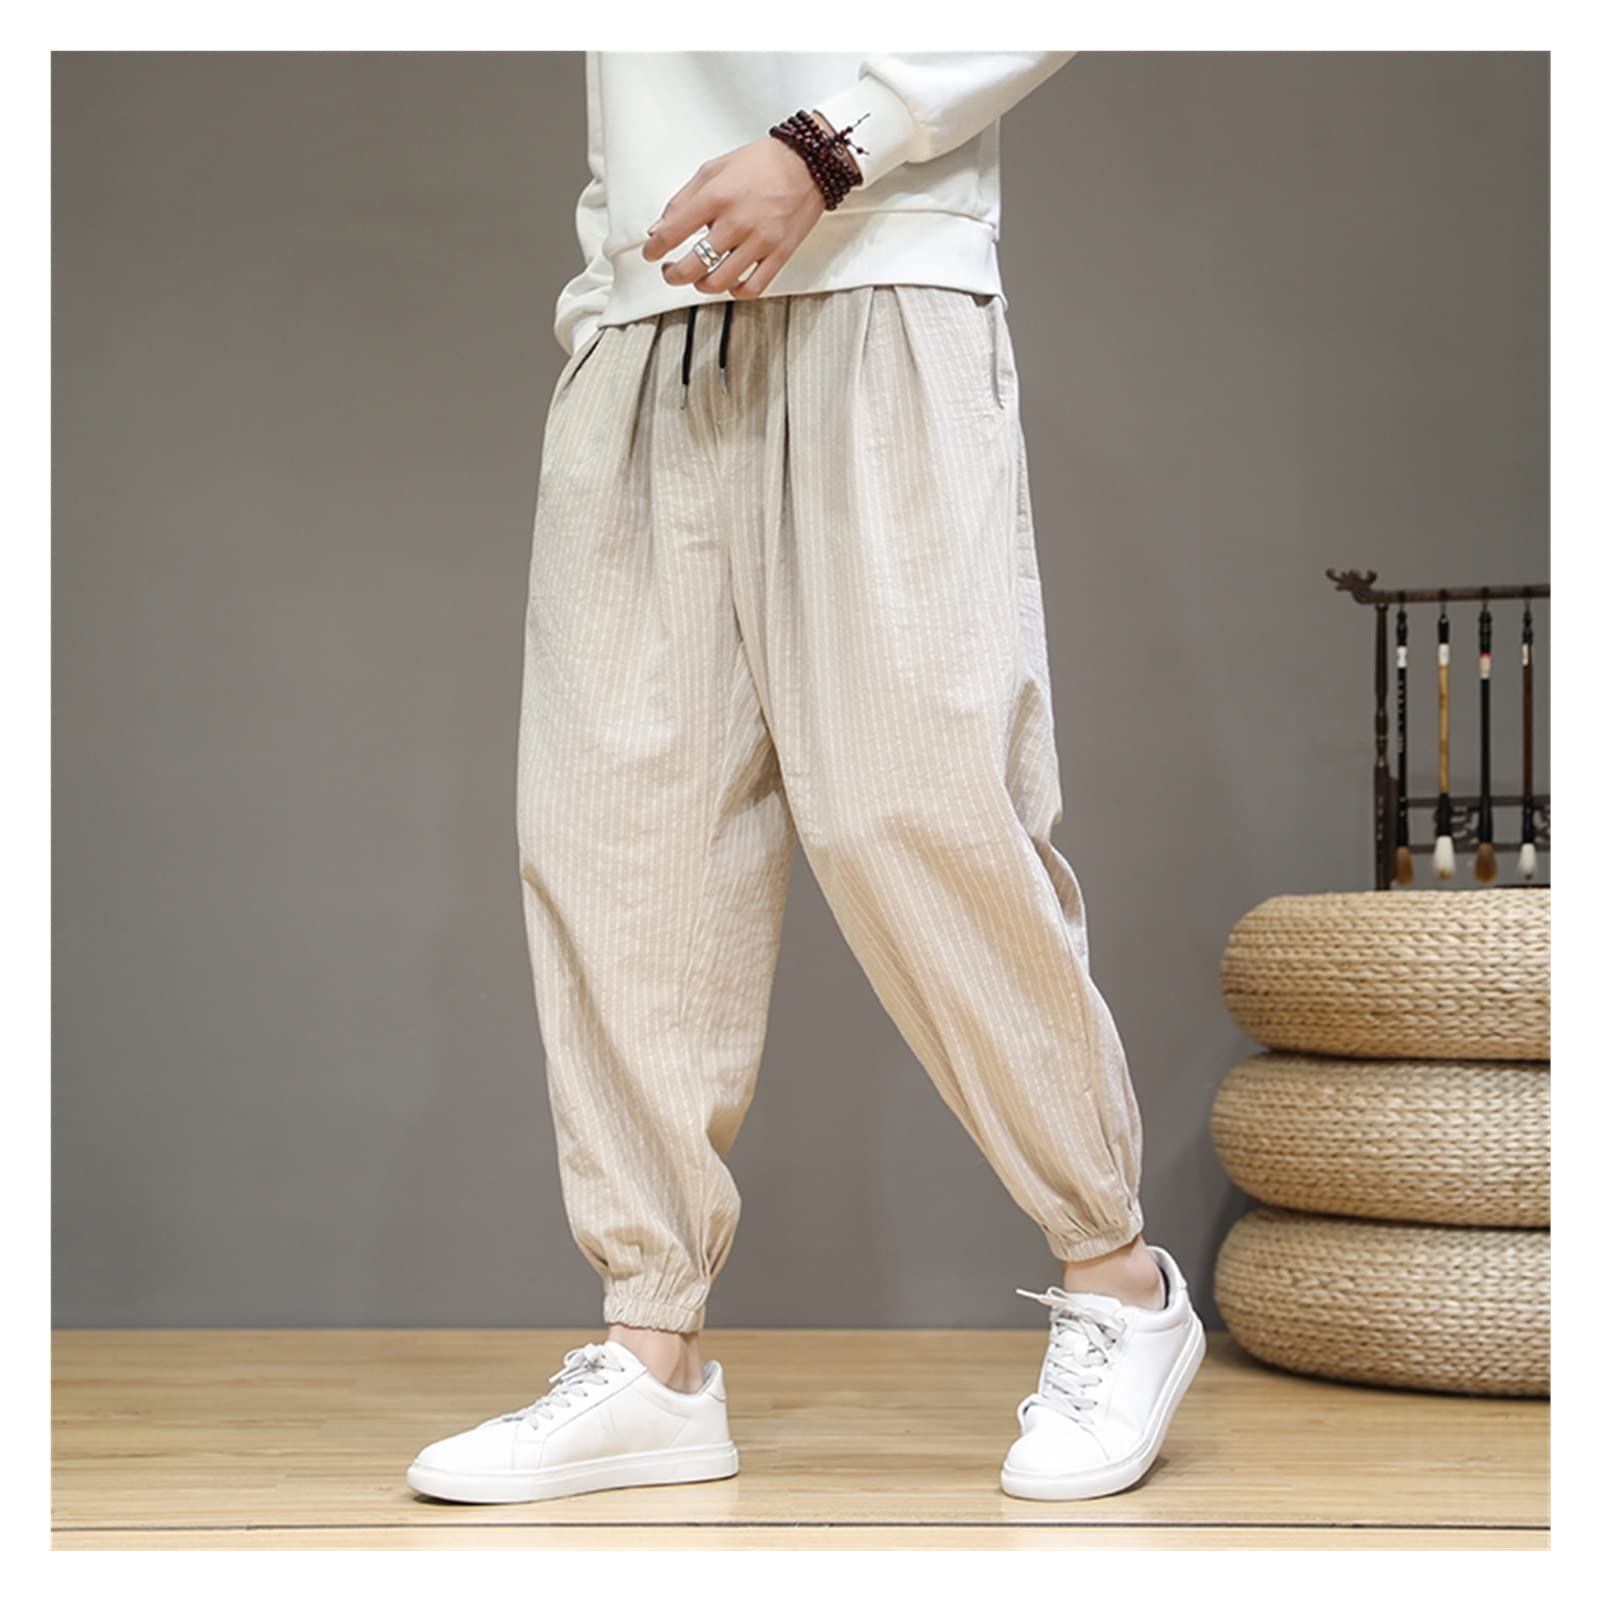 Are These the Best Sweatpants for Comfort in 2023